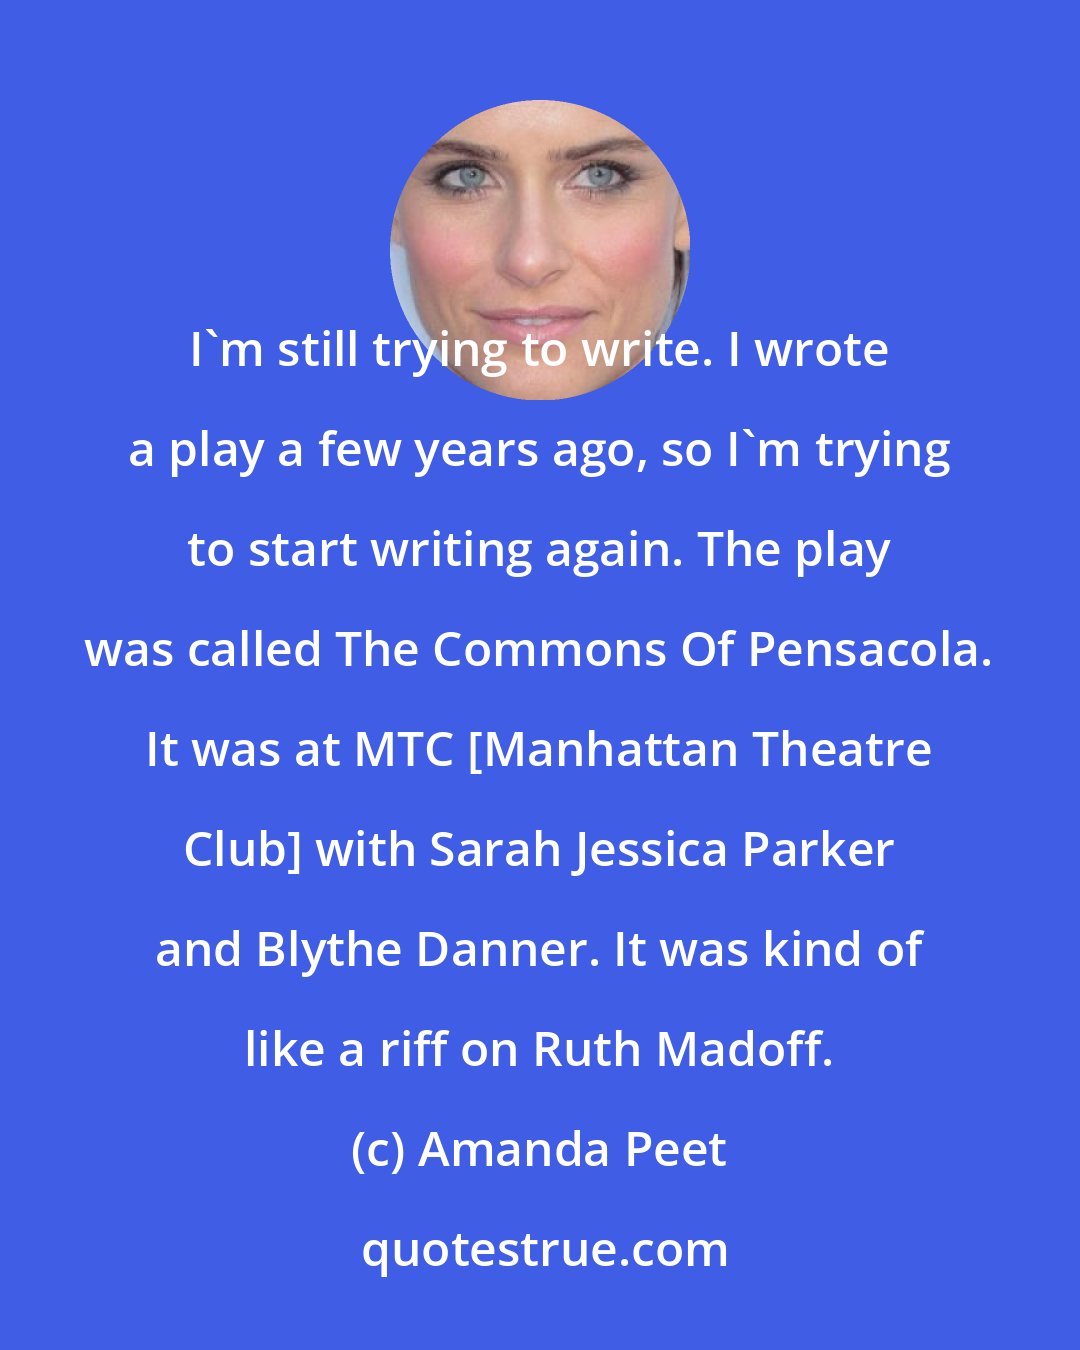 Amanda Peet: I'm still trying to write. I wrote a play a few years ago, so I'm trying to start writing again. The play was called The Commons Of Pensacola. It was at MTC [Manhattan Theatre Club] with Sarah Jessica Parker and Blythe Danner. It was kind of like a riff on Ruth Madoff.